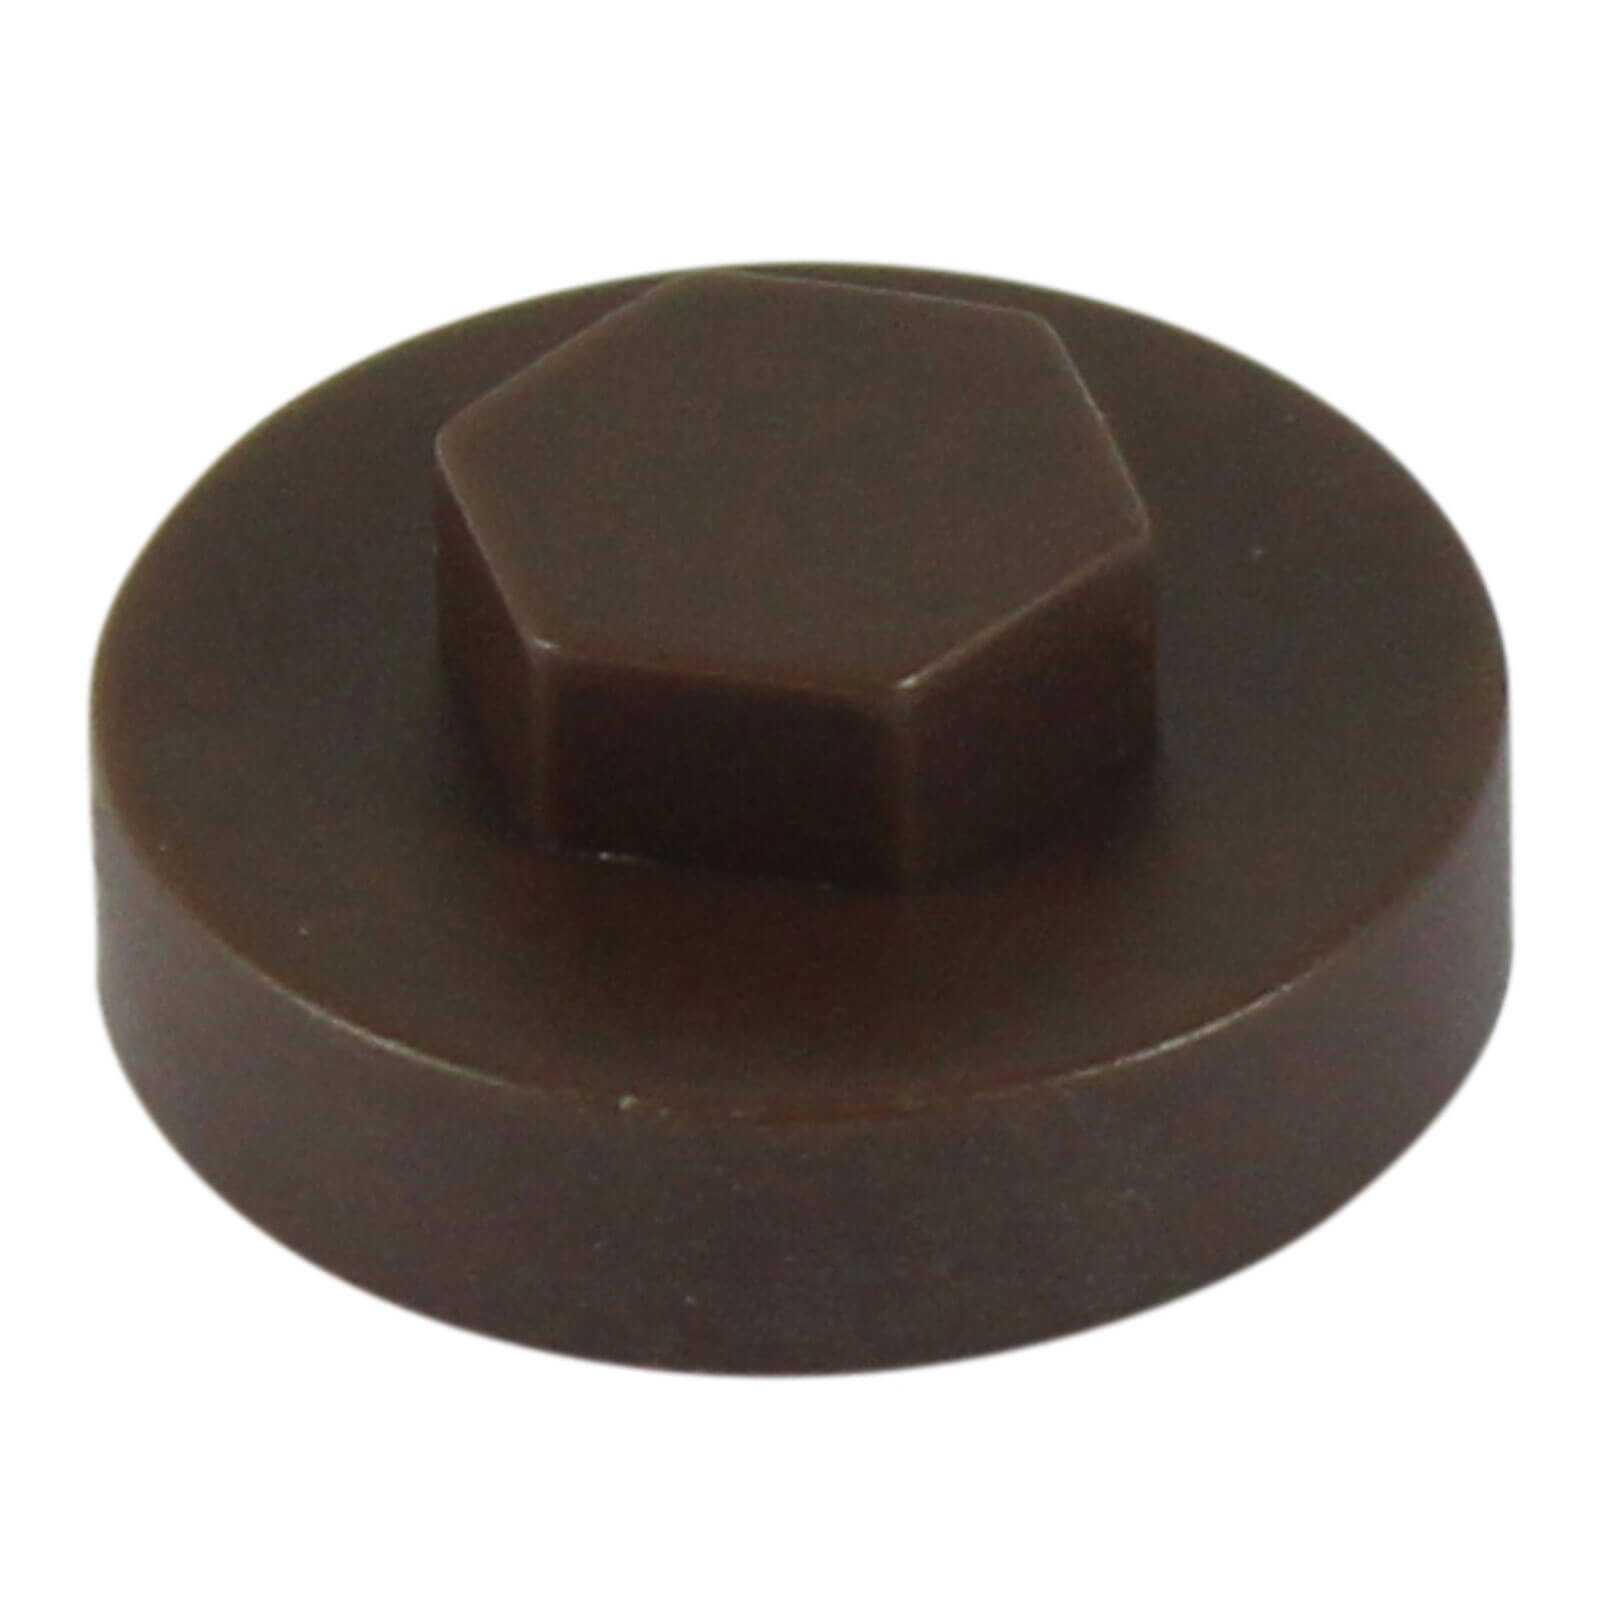 Image of Colour Match Hexagon Screw Cover Cap 5/16" x 16mm Van Dyke Brown Pack of 1000